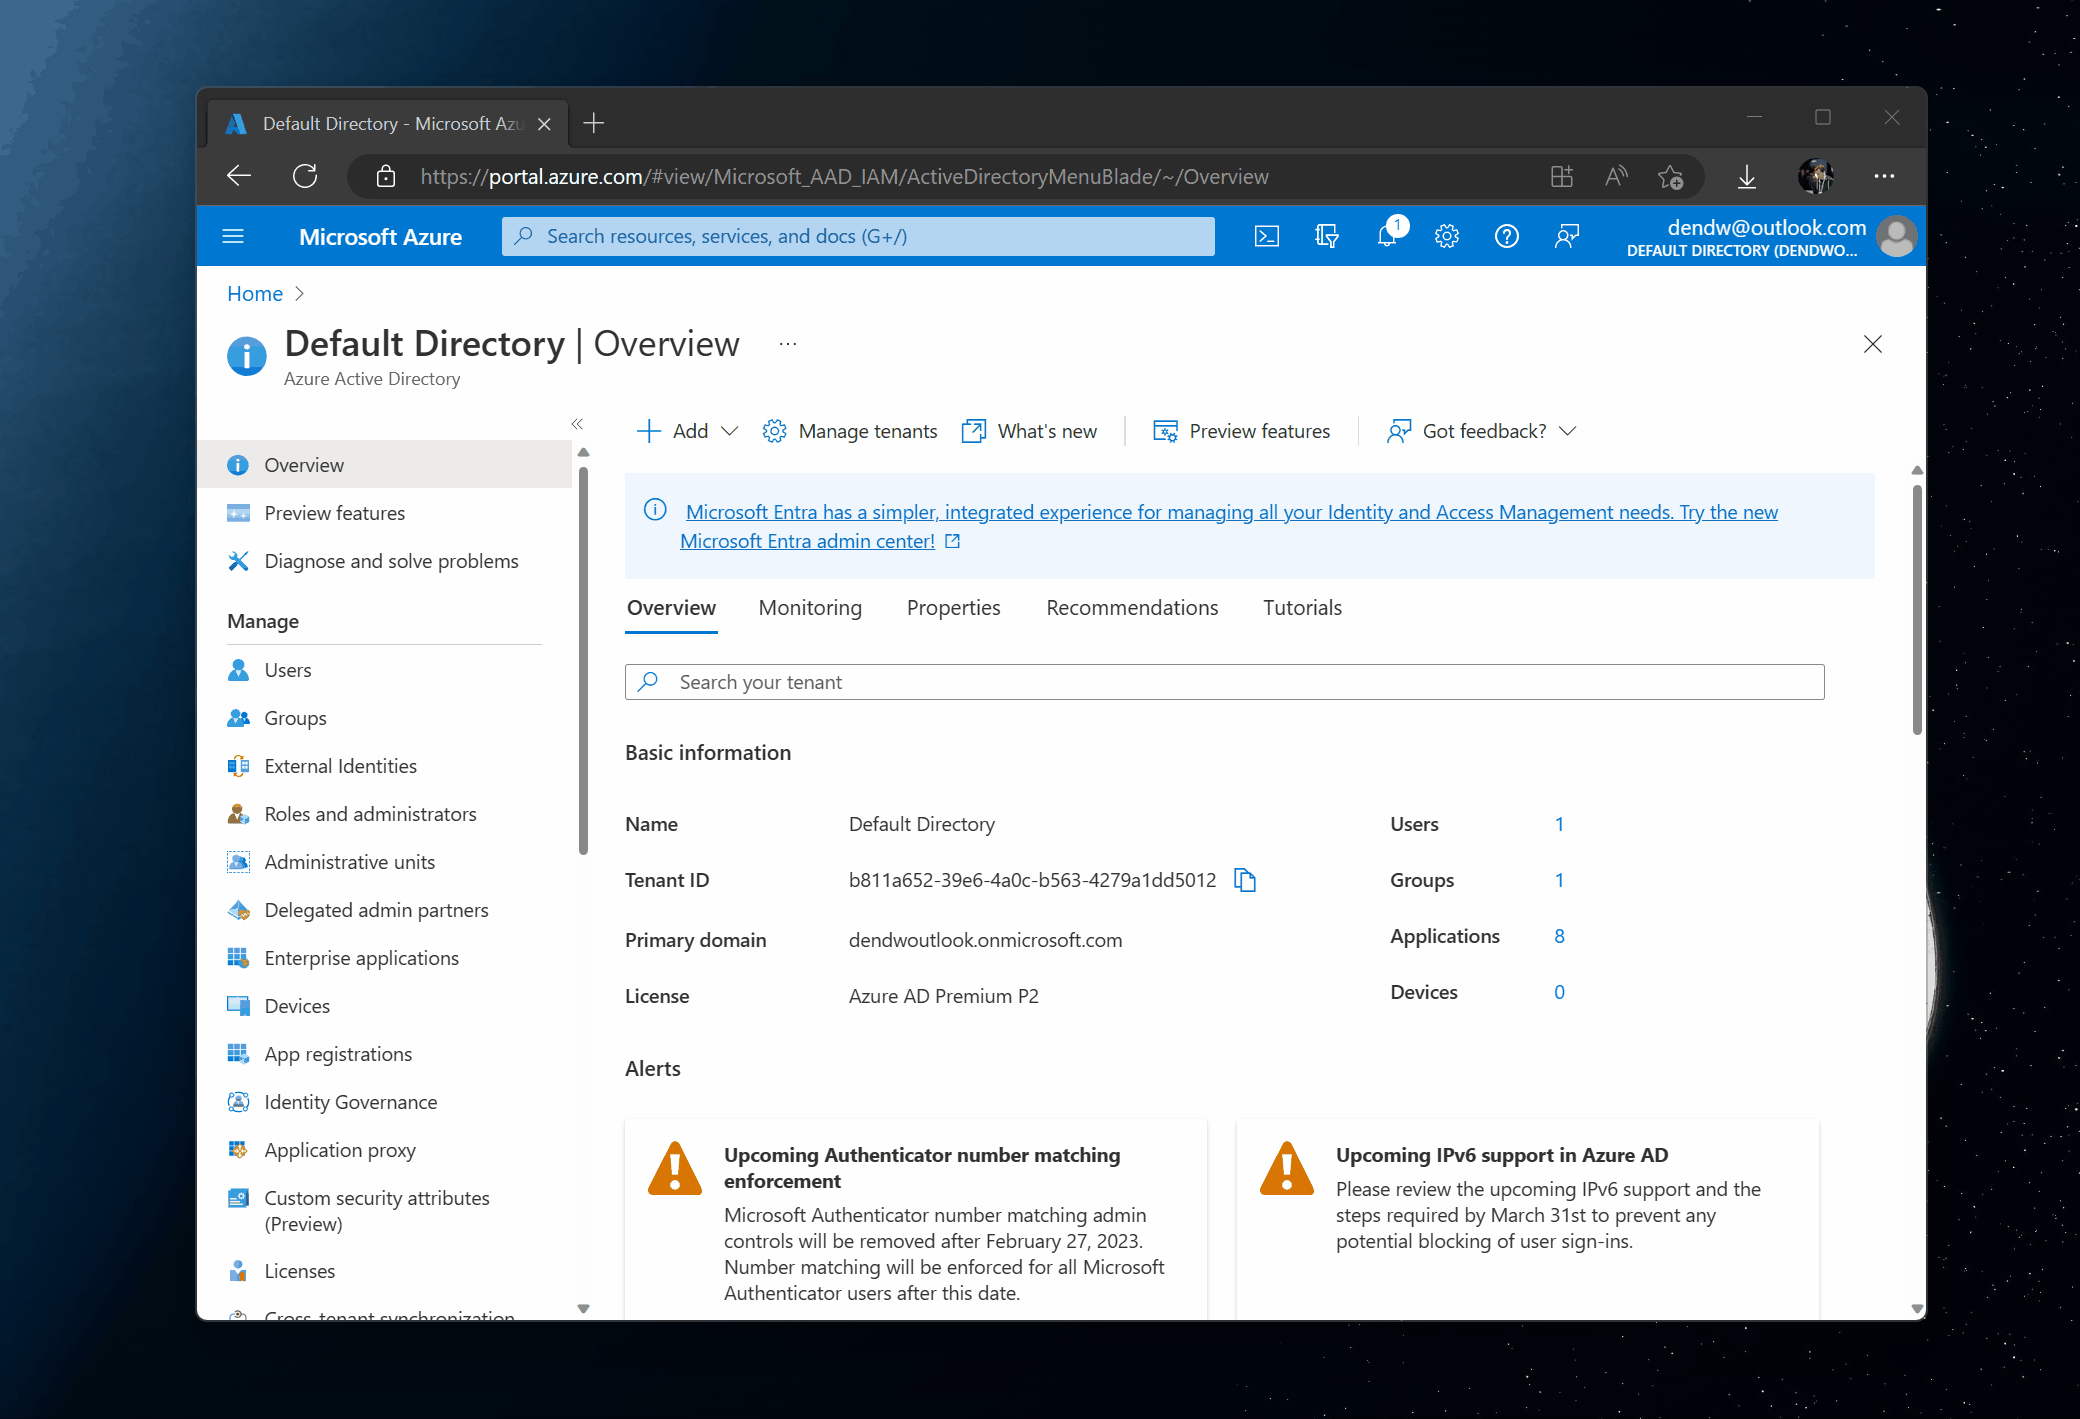 Azure AD recommendations showing up inside the Azure Portal